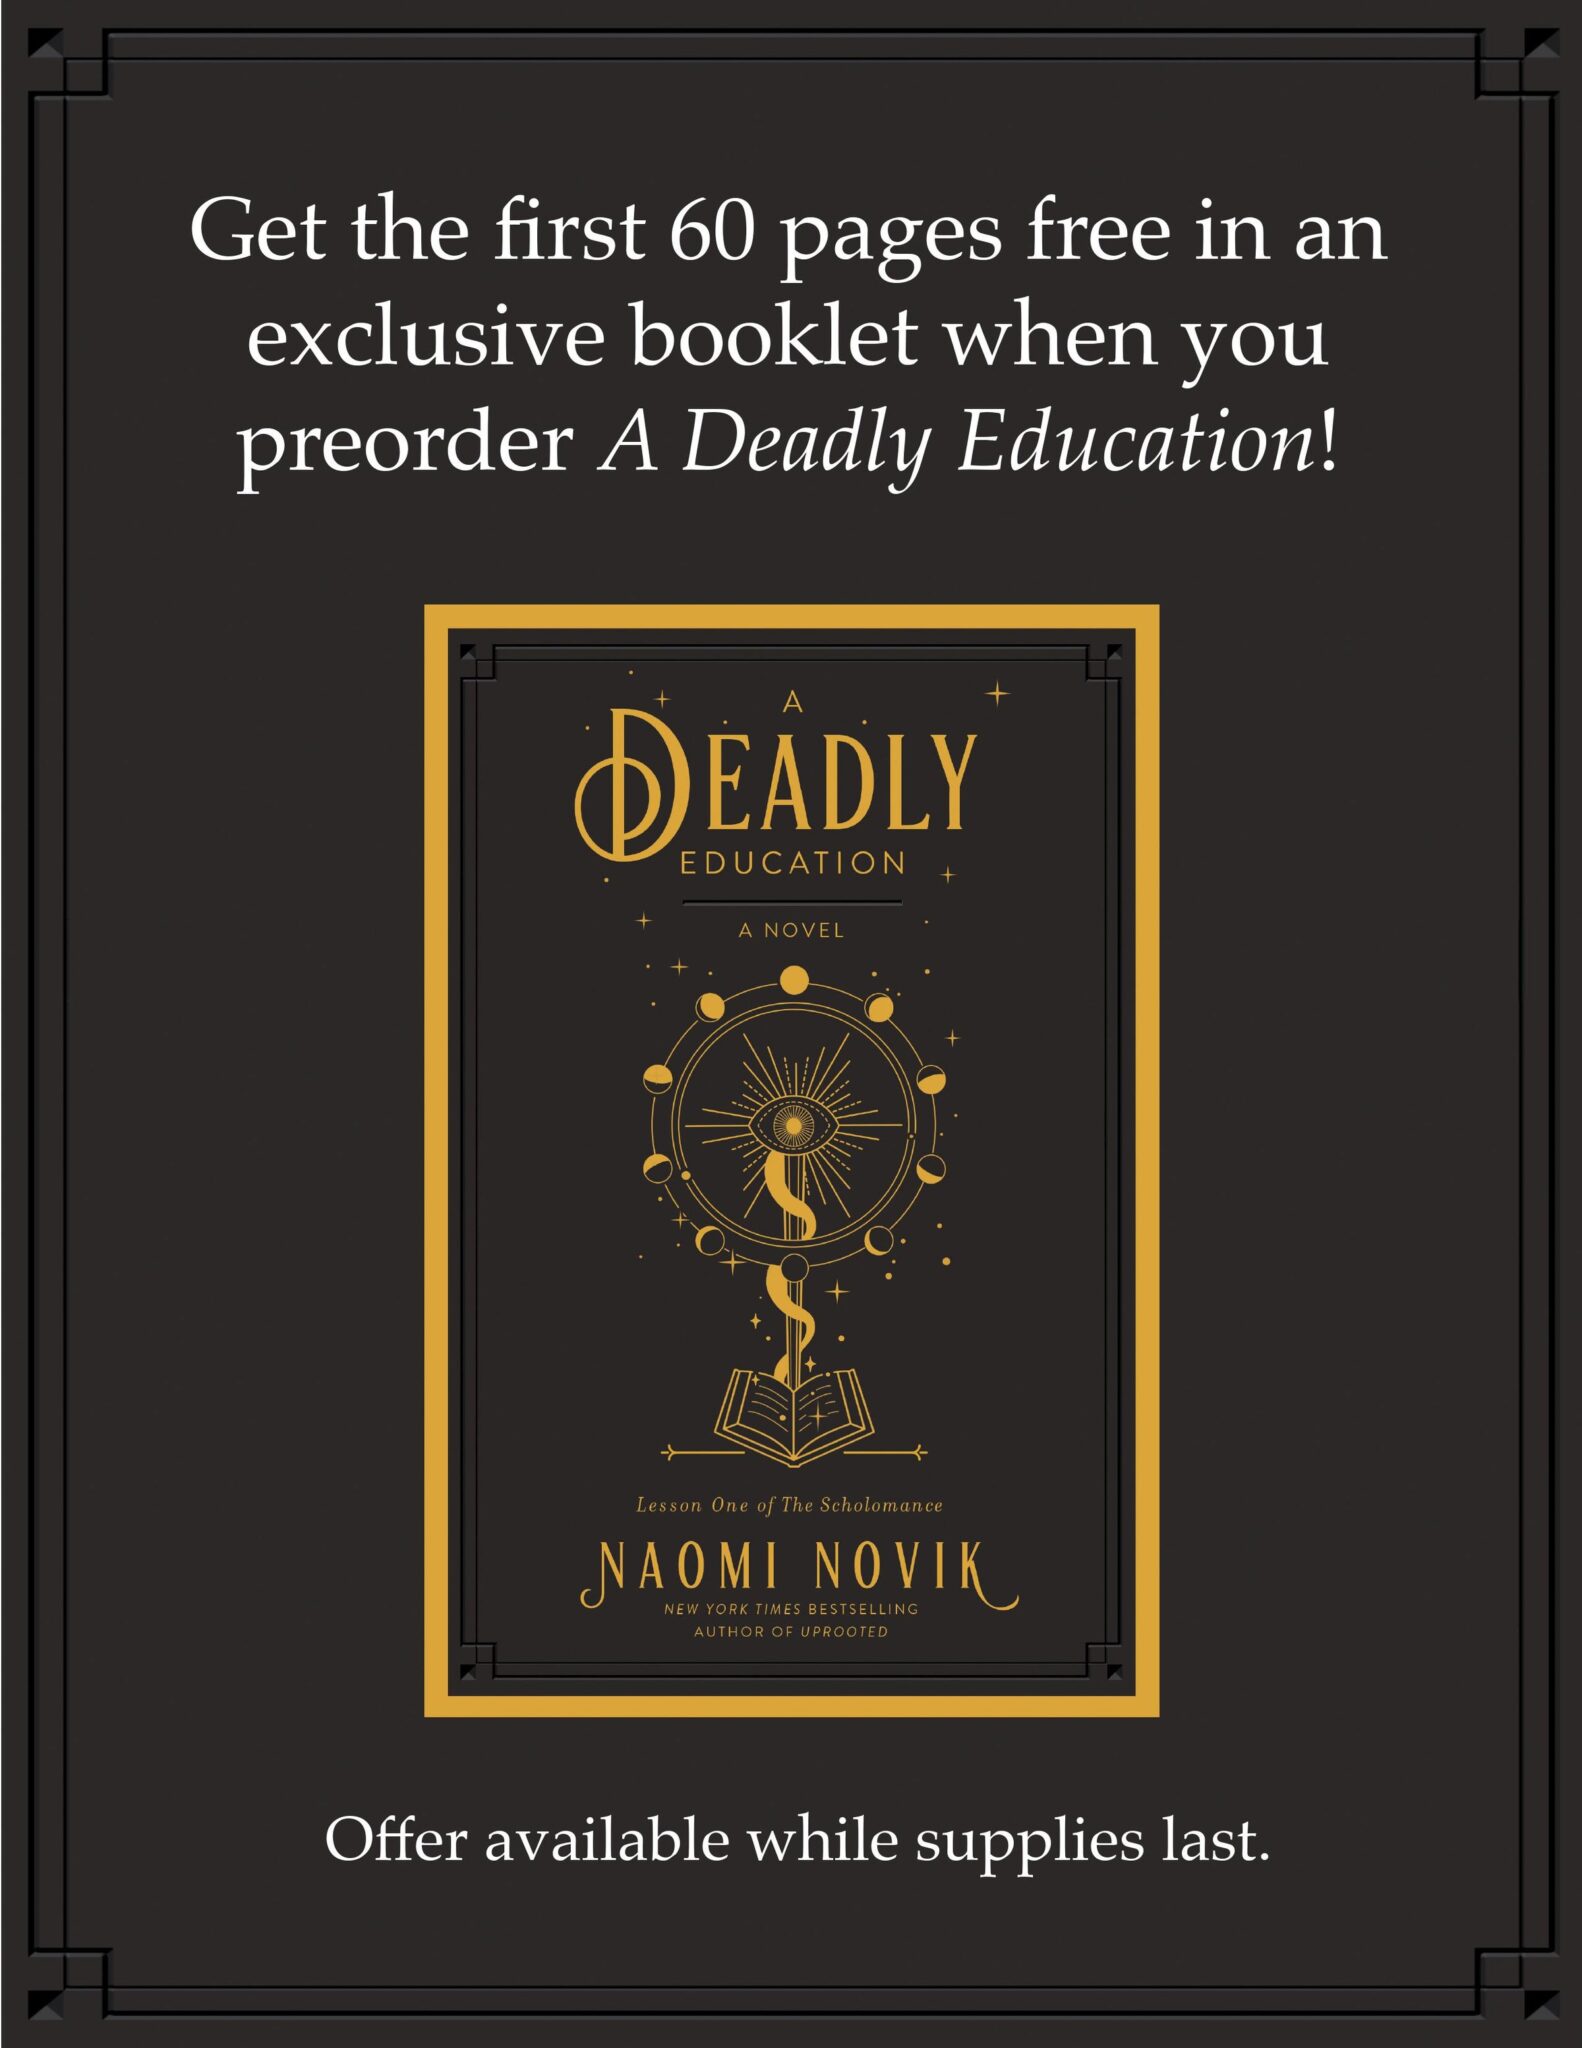 a deadly education book 4